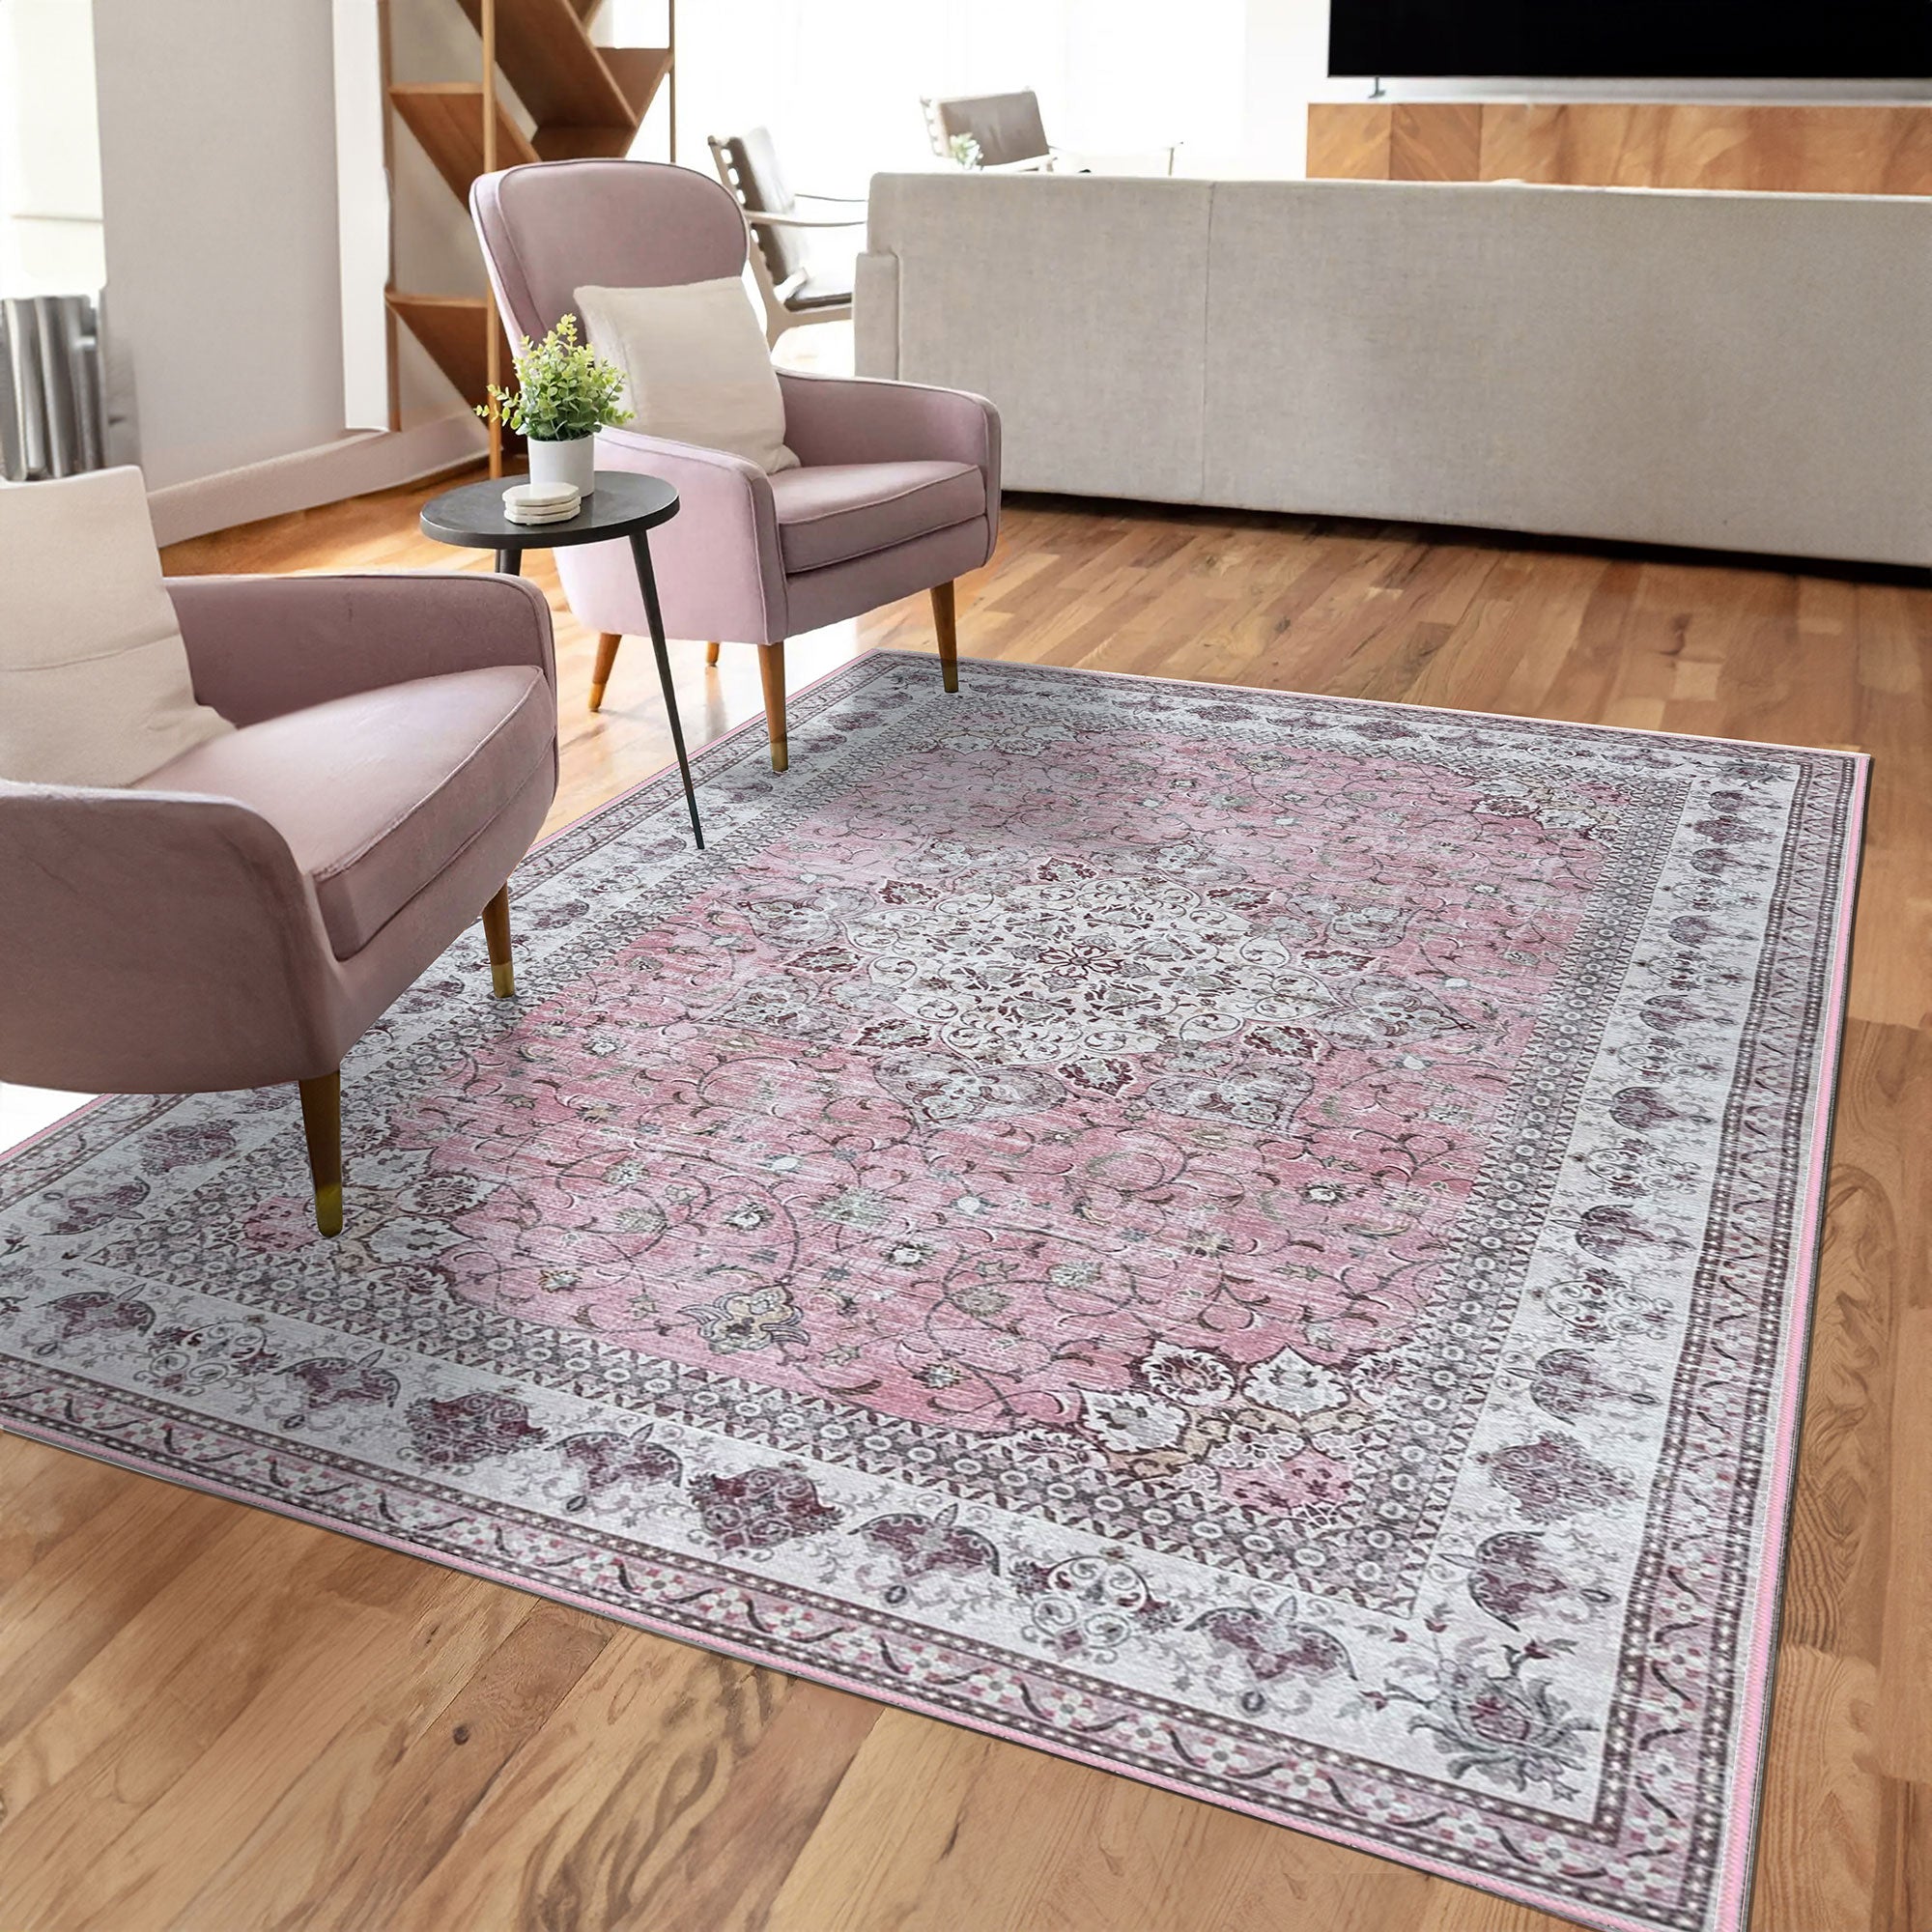 Adora Cherry Pink, Maroon & Cream Machine Washable Rug and Runner - For Living Room, Dining Room, Bedroom, Kitchens, Kids/Nursery Room